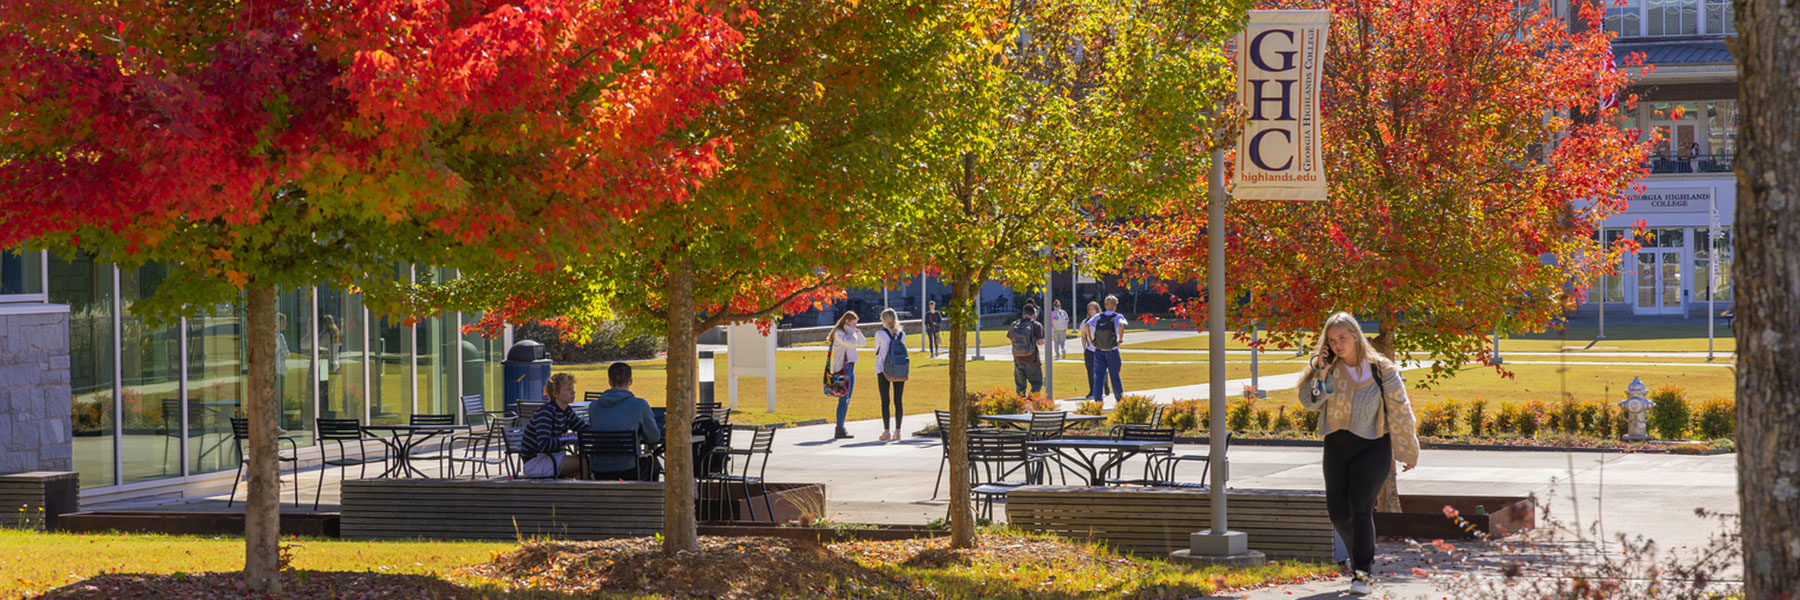 Cartersville campus in fall with colorful leaves. Students walking to classes.